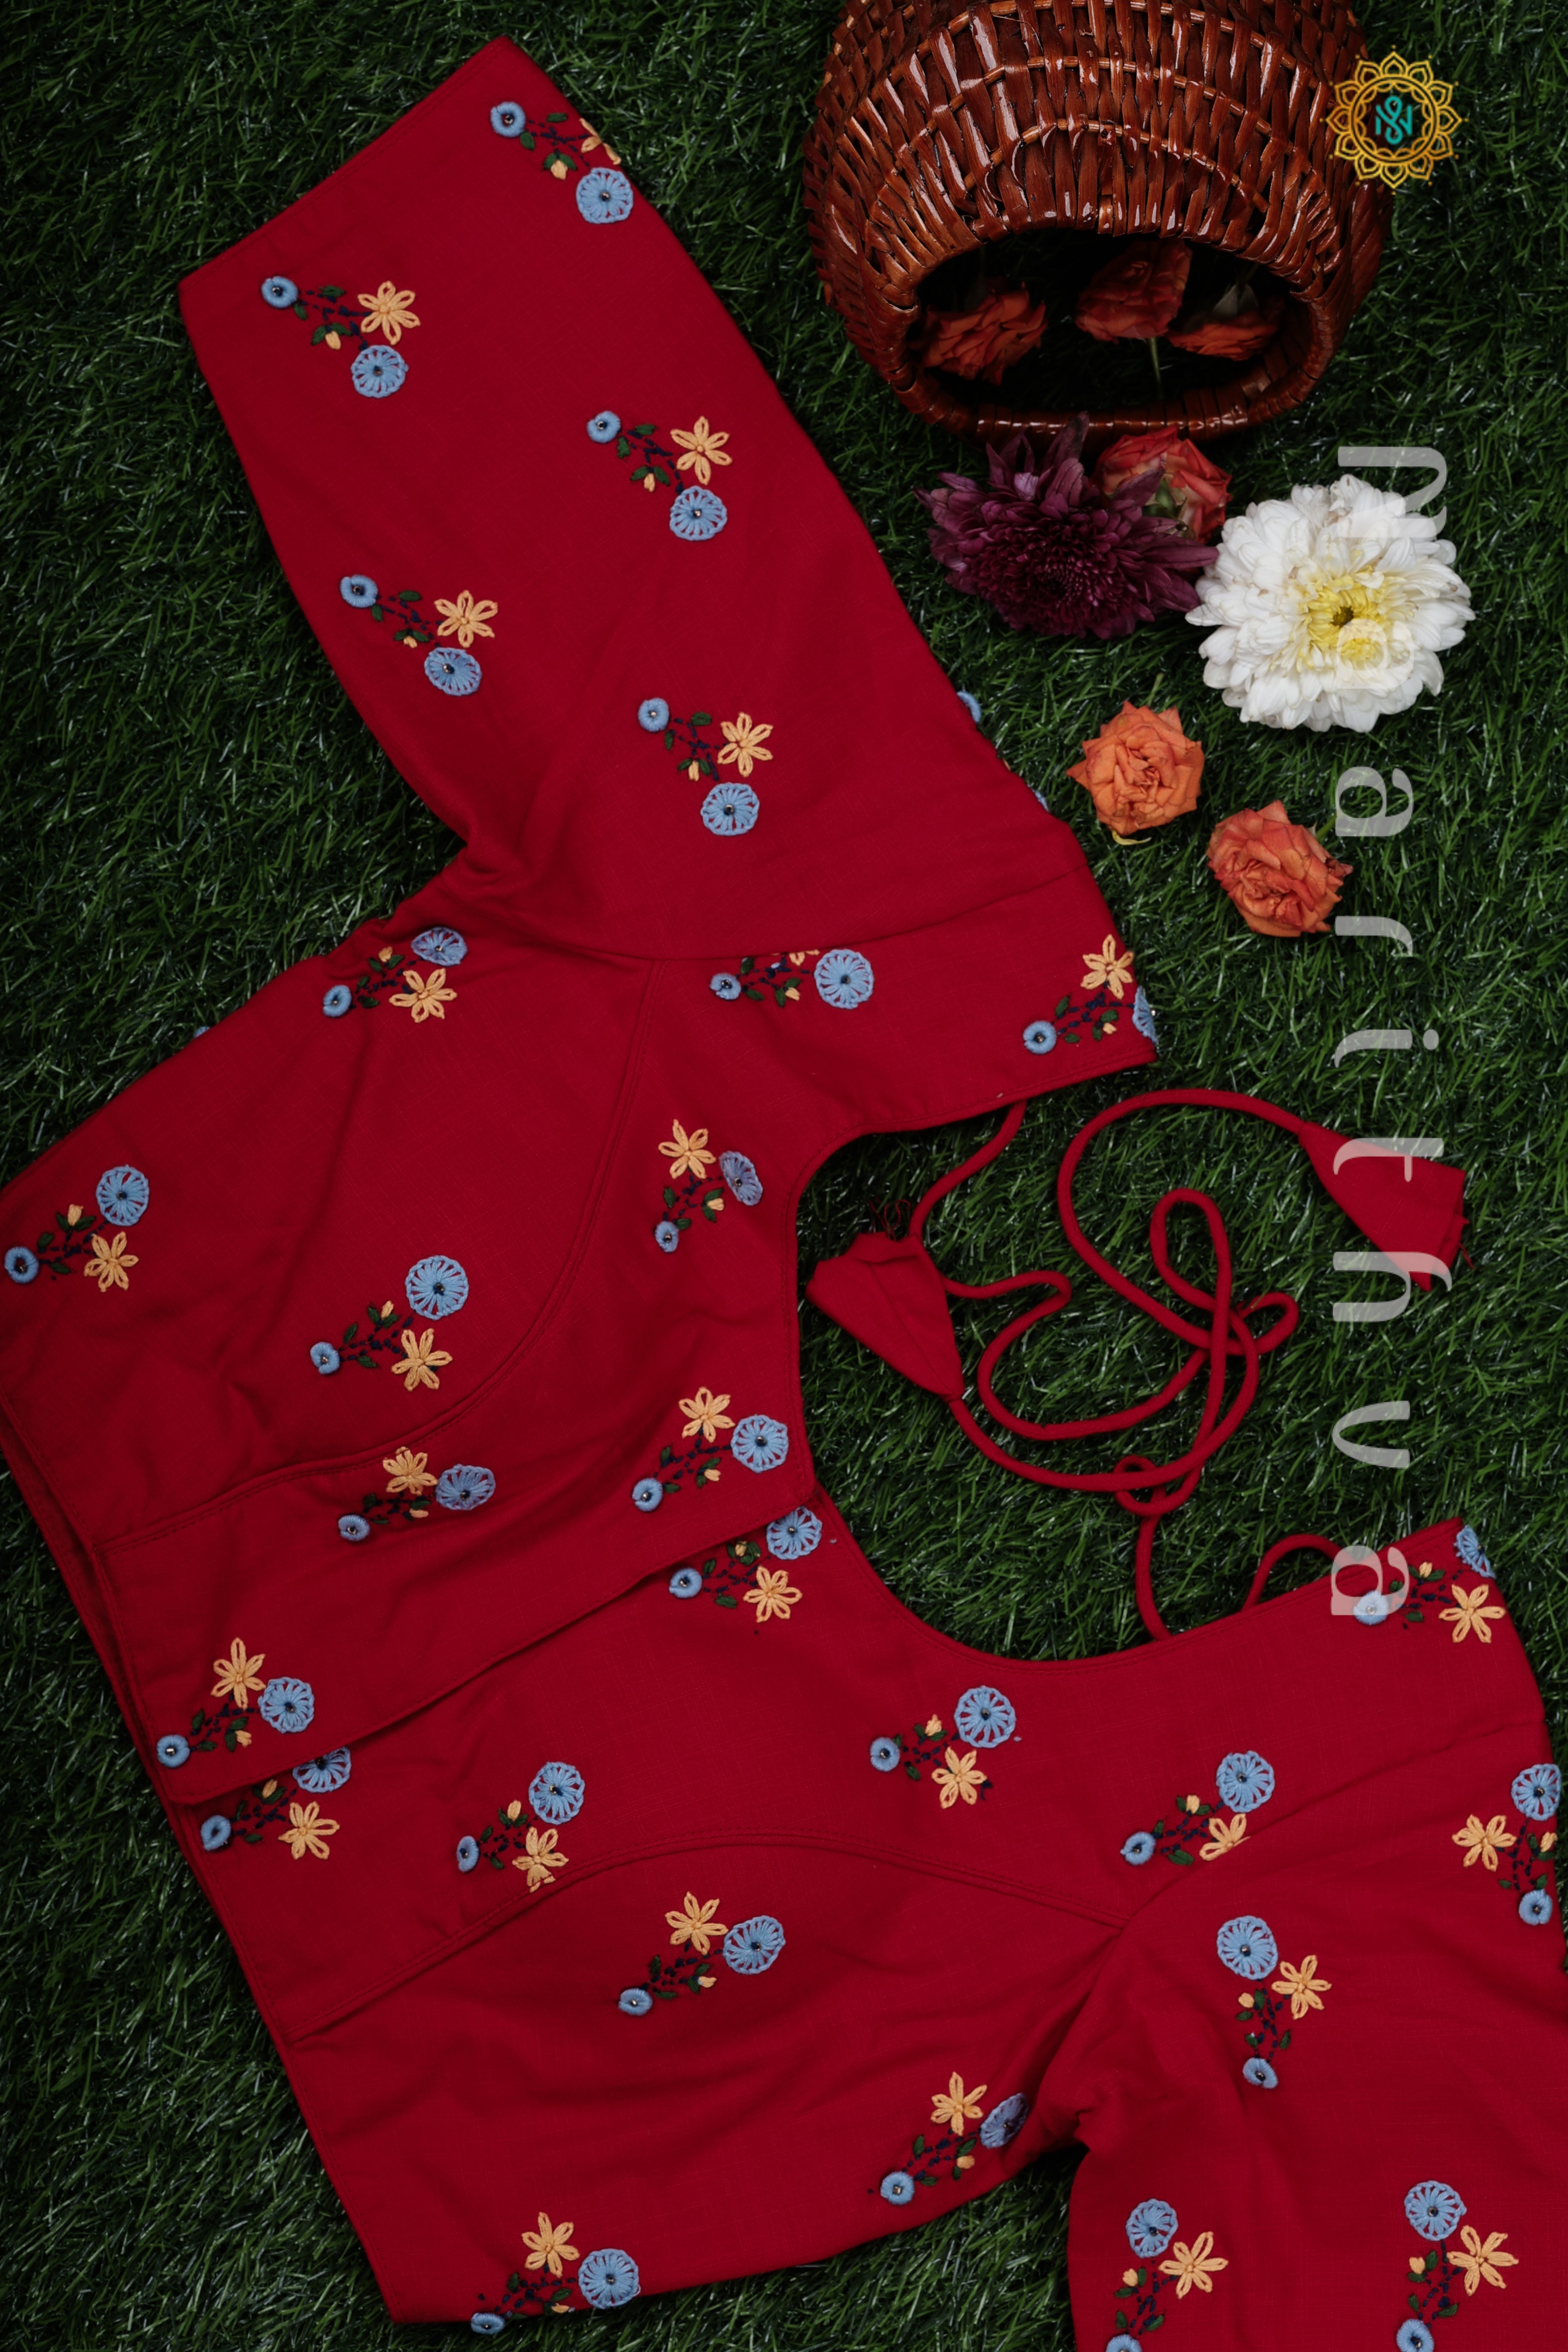 RED - COTTON READYMADE HAND EMBROIDERY BLOUSE